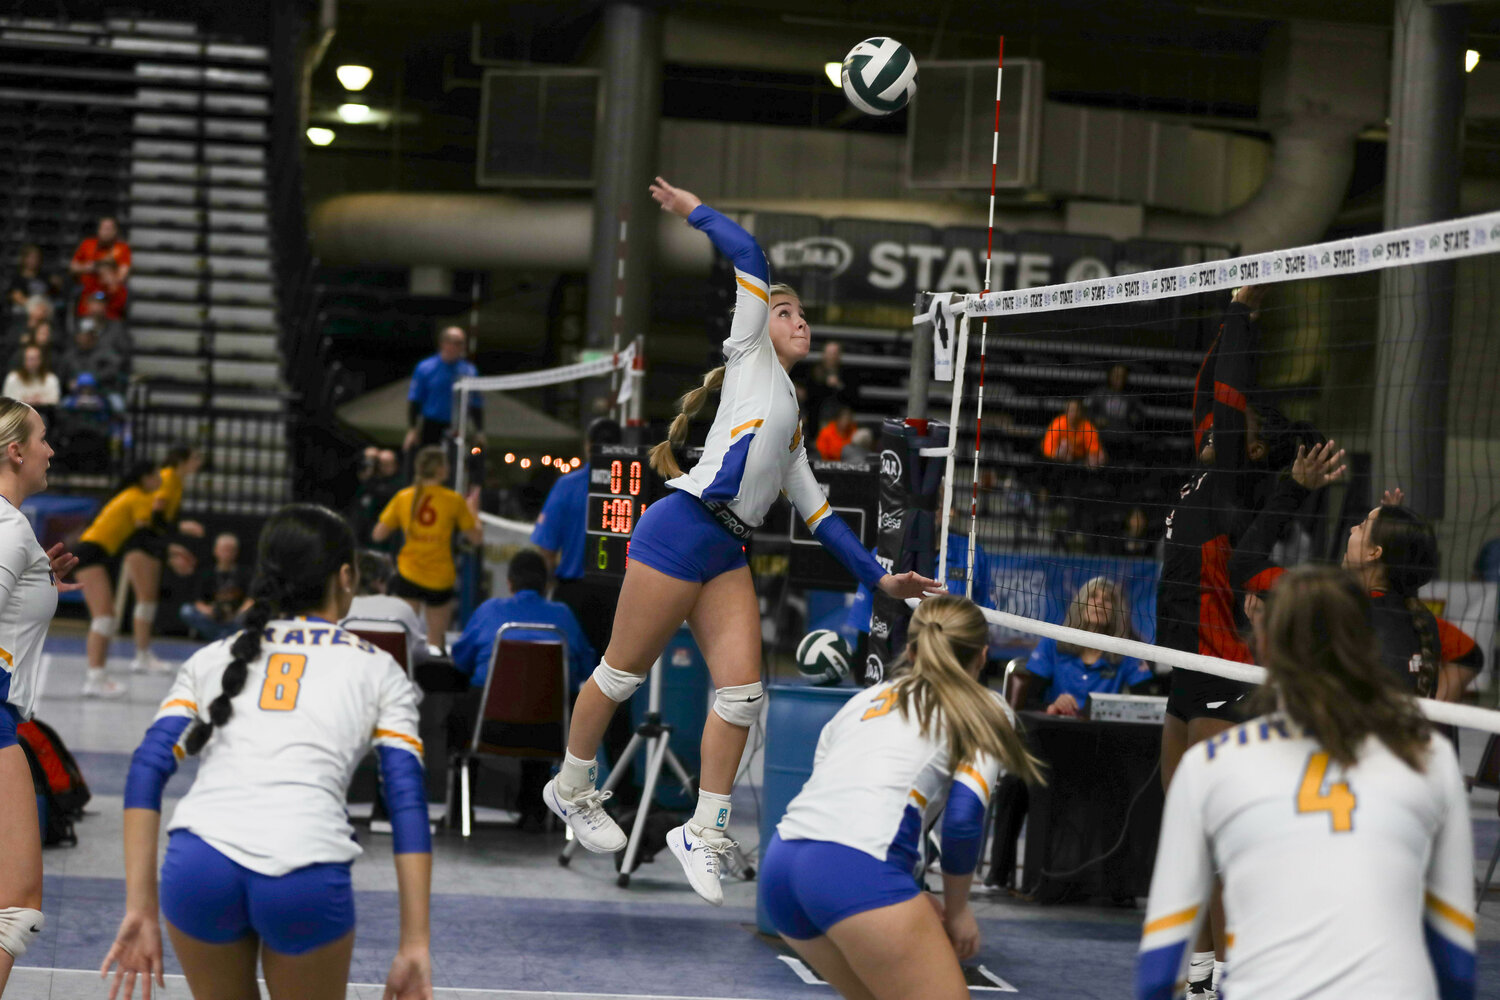 Danika Hallom spikes the ball during Adna's win over Liberty at the state tournament on Nov. 9 in Yakima.